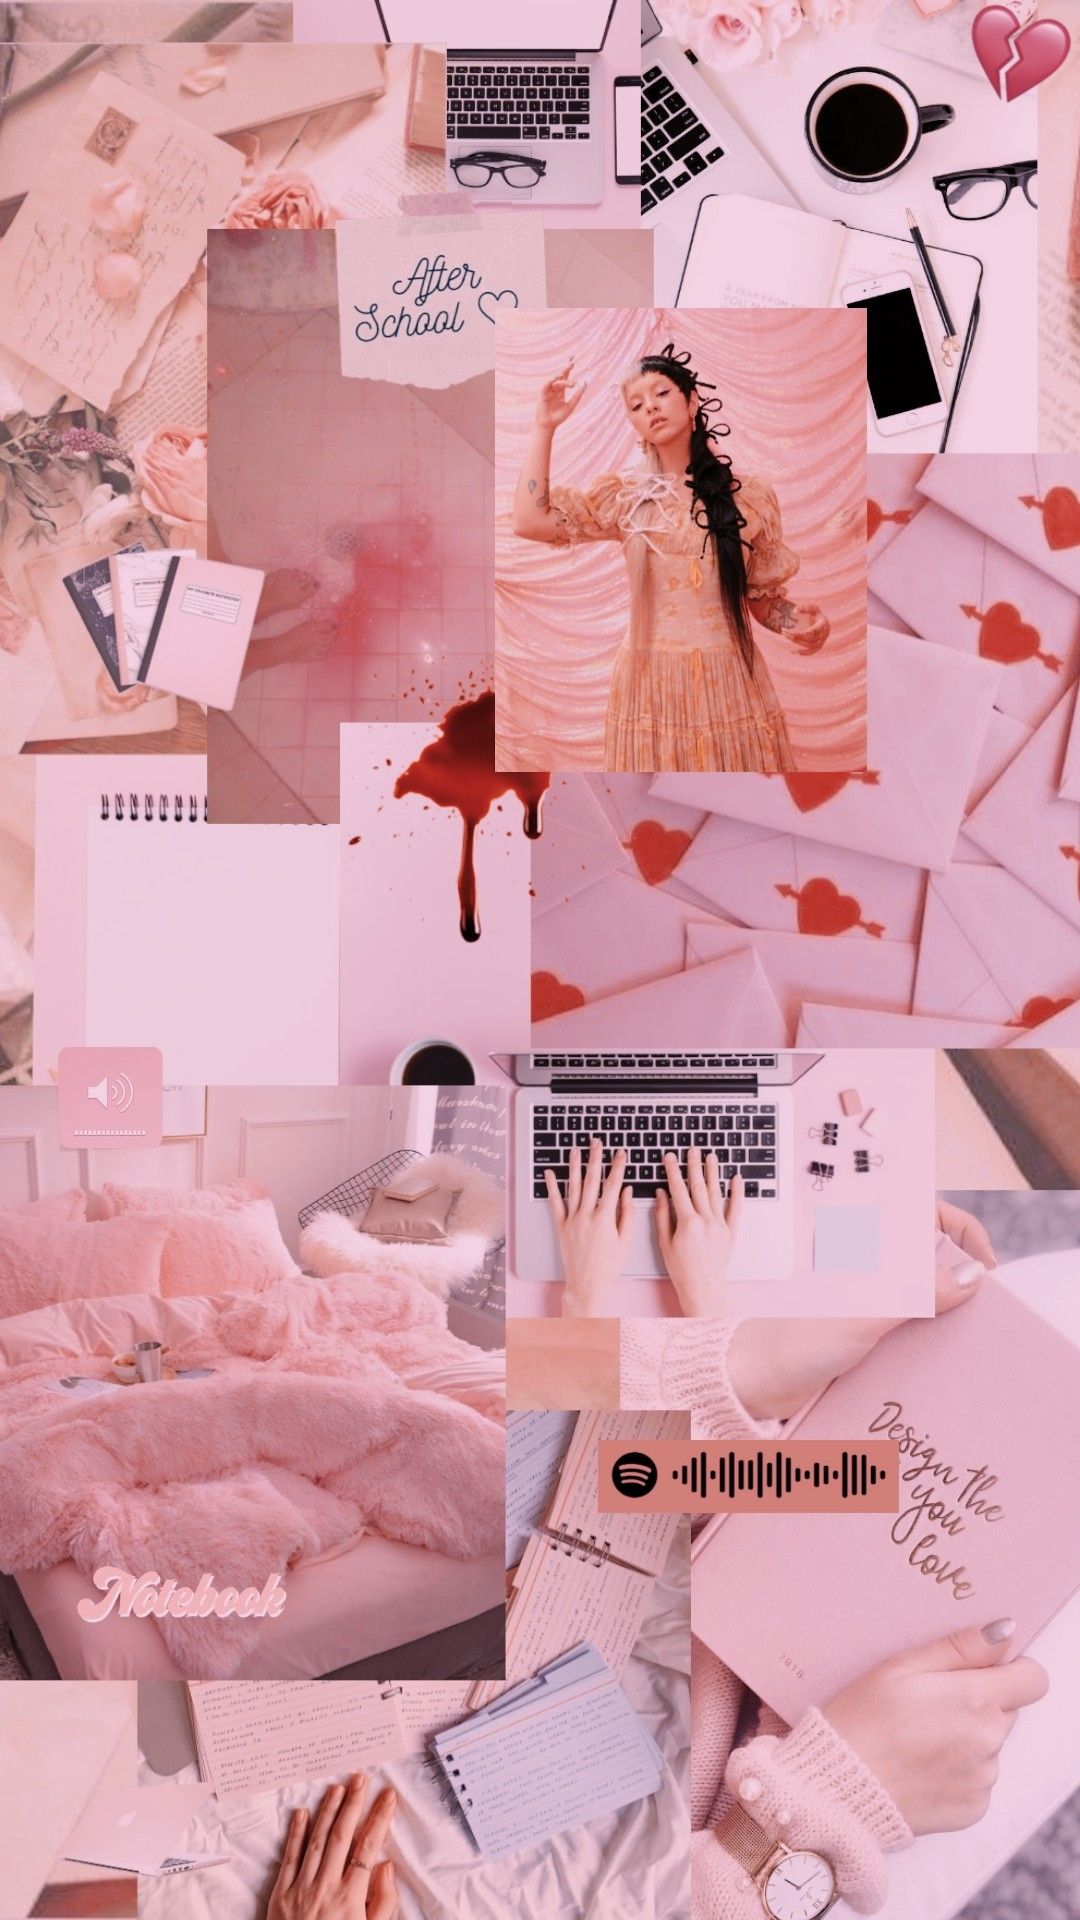 A collage of pictures with pink backgrounds - Melanie Martinez